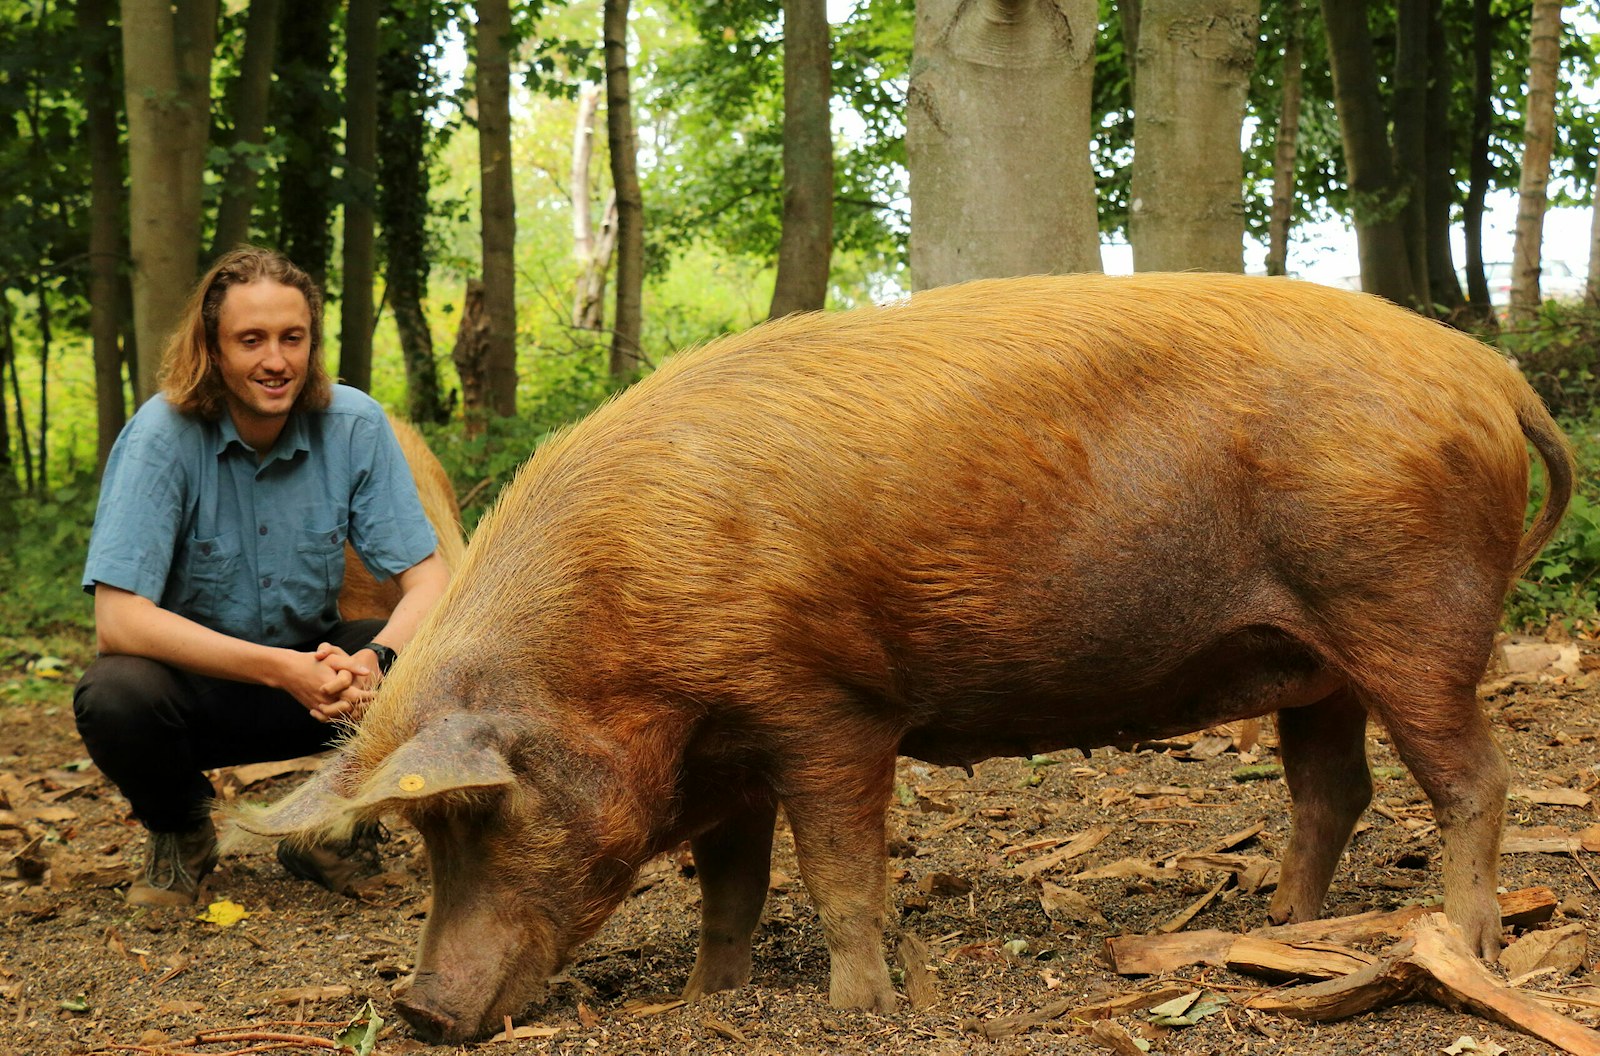 Dominic Buscall squatting by a Tamworth pig